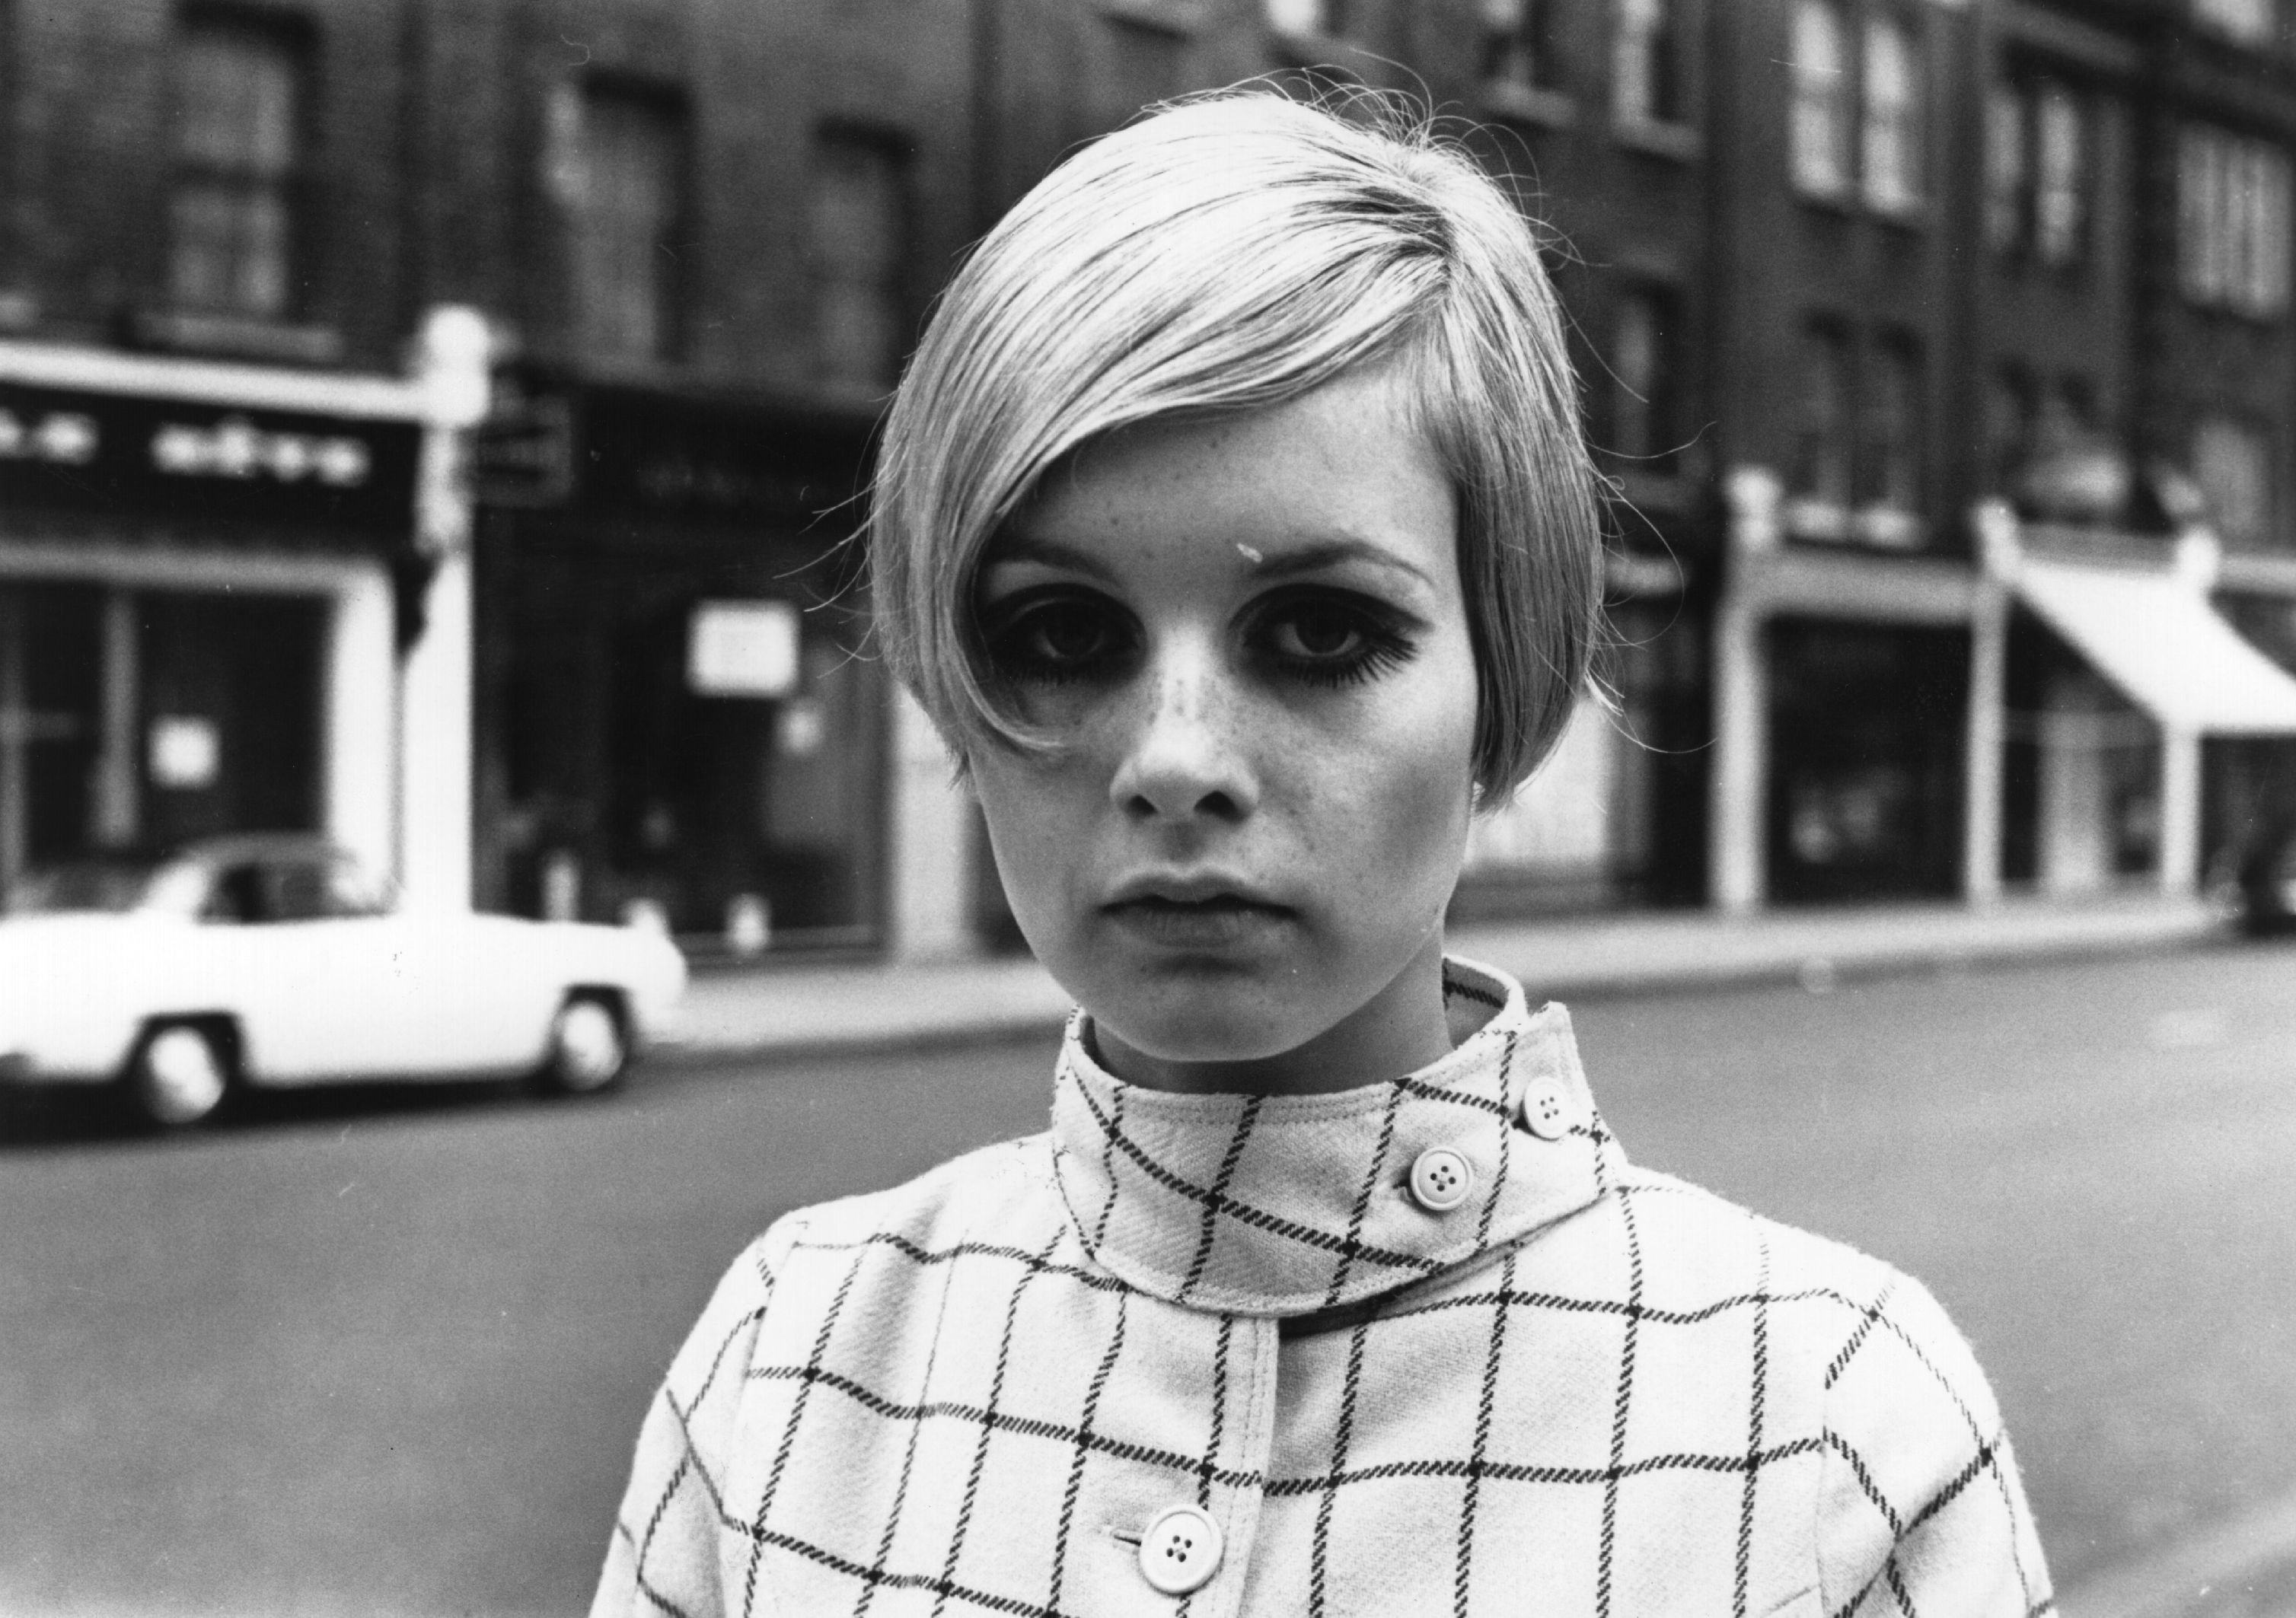 Twiggy in front of storefronts